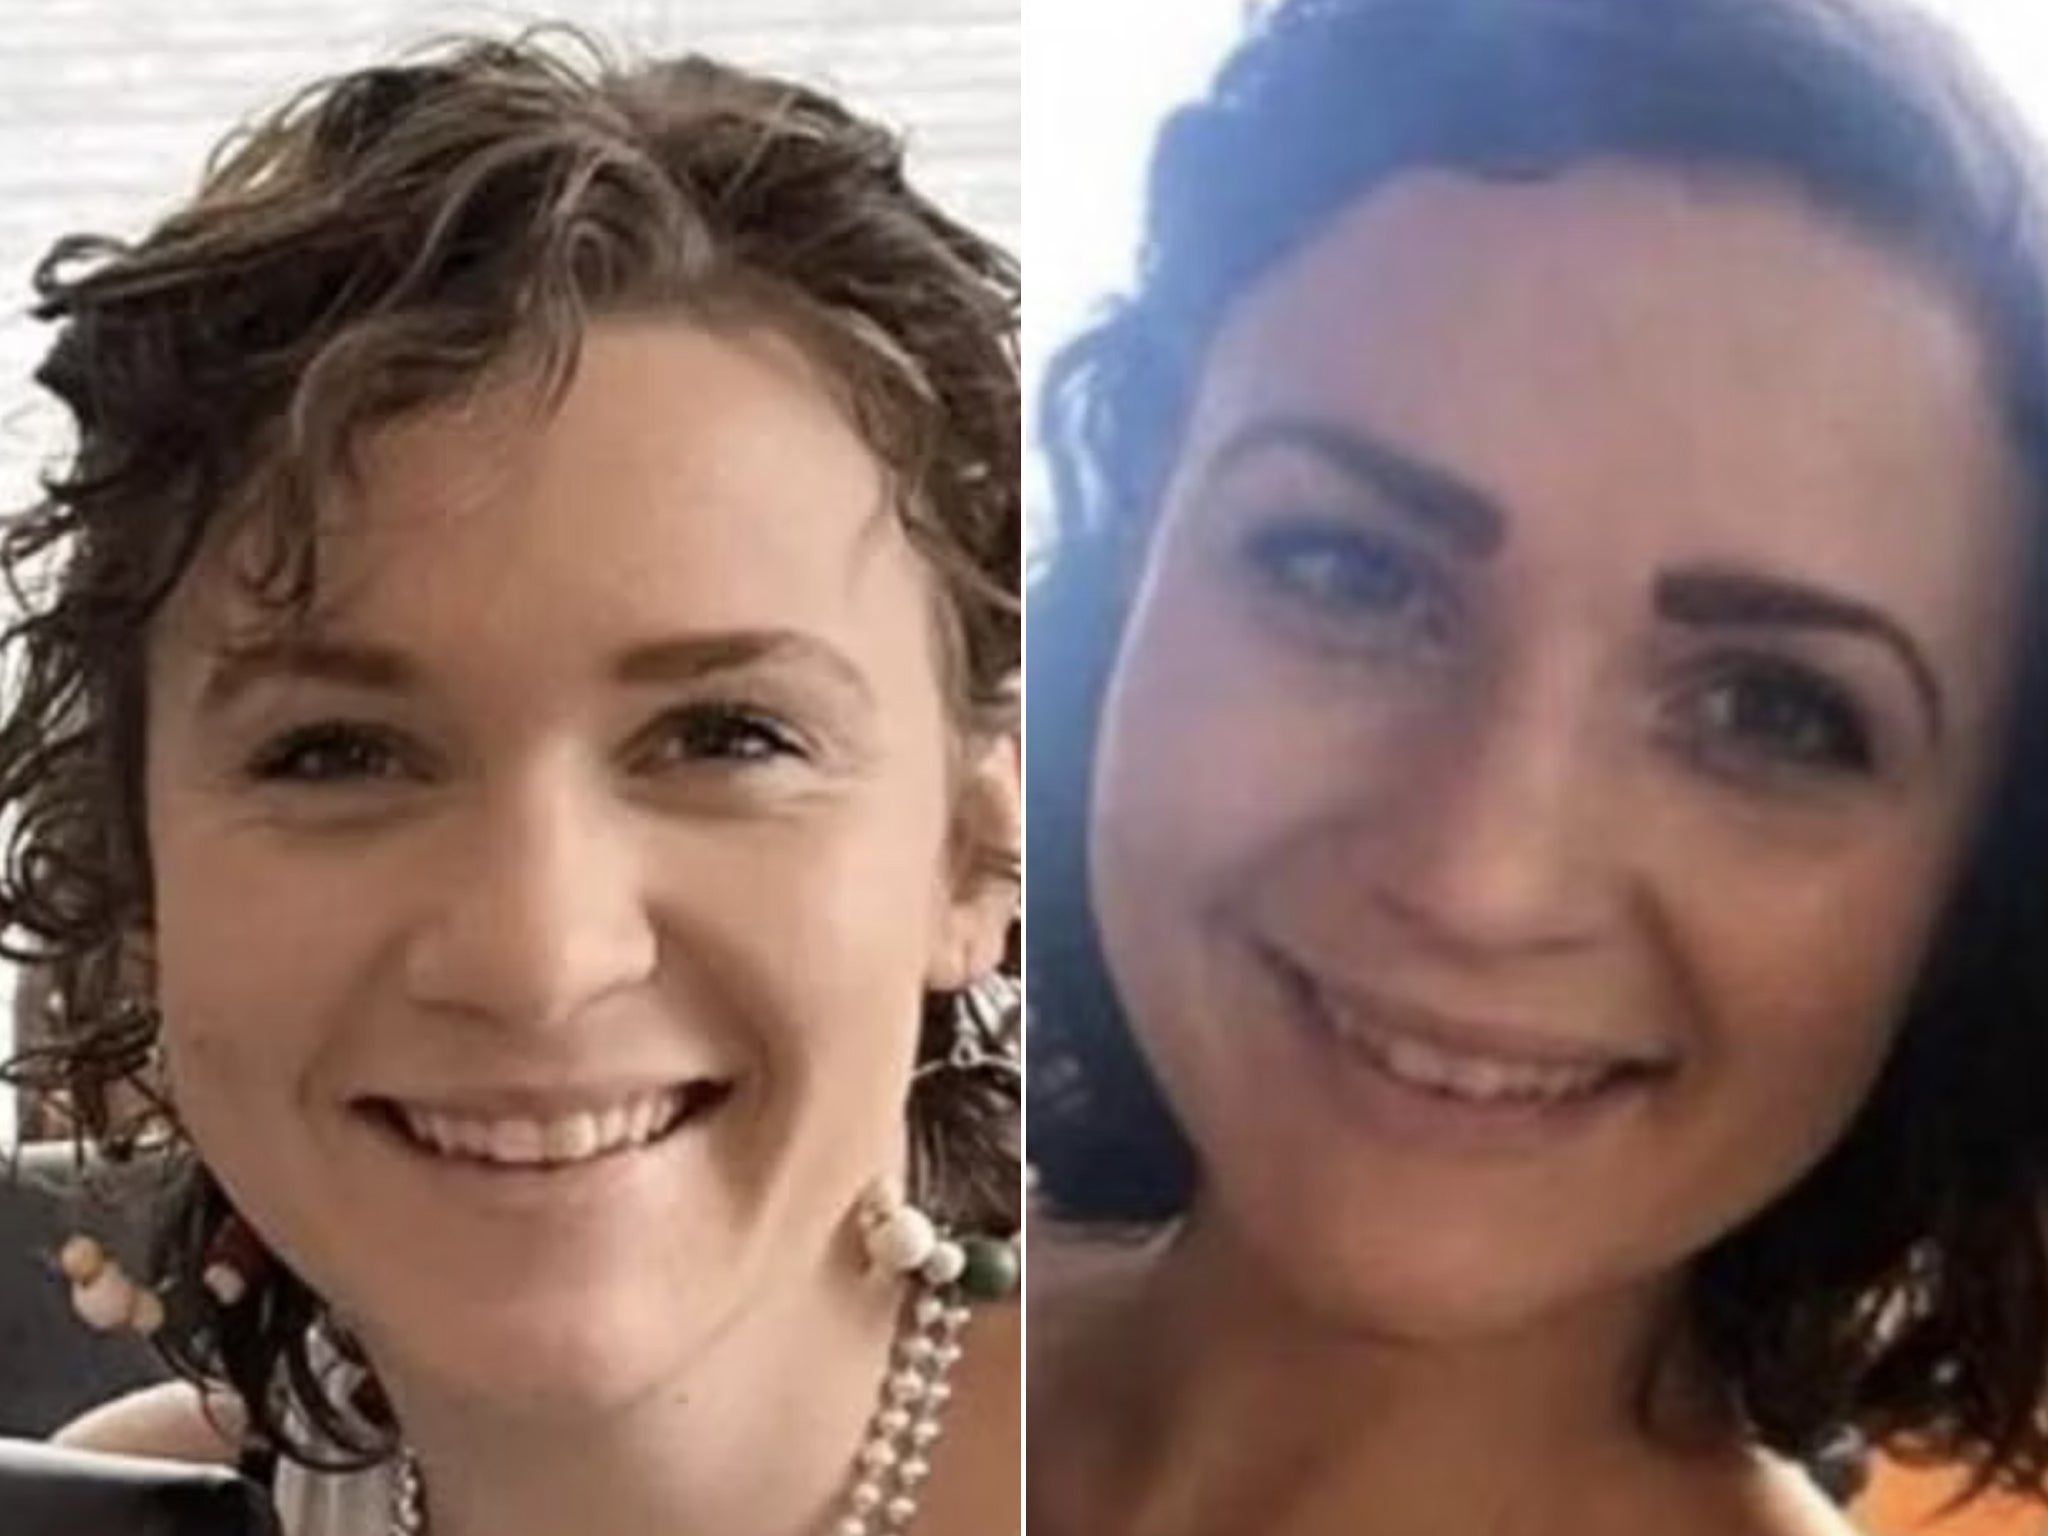 The mother of two hasn’t been seen since 31 March